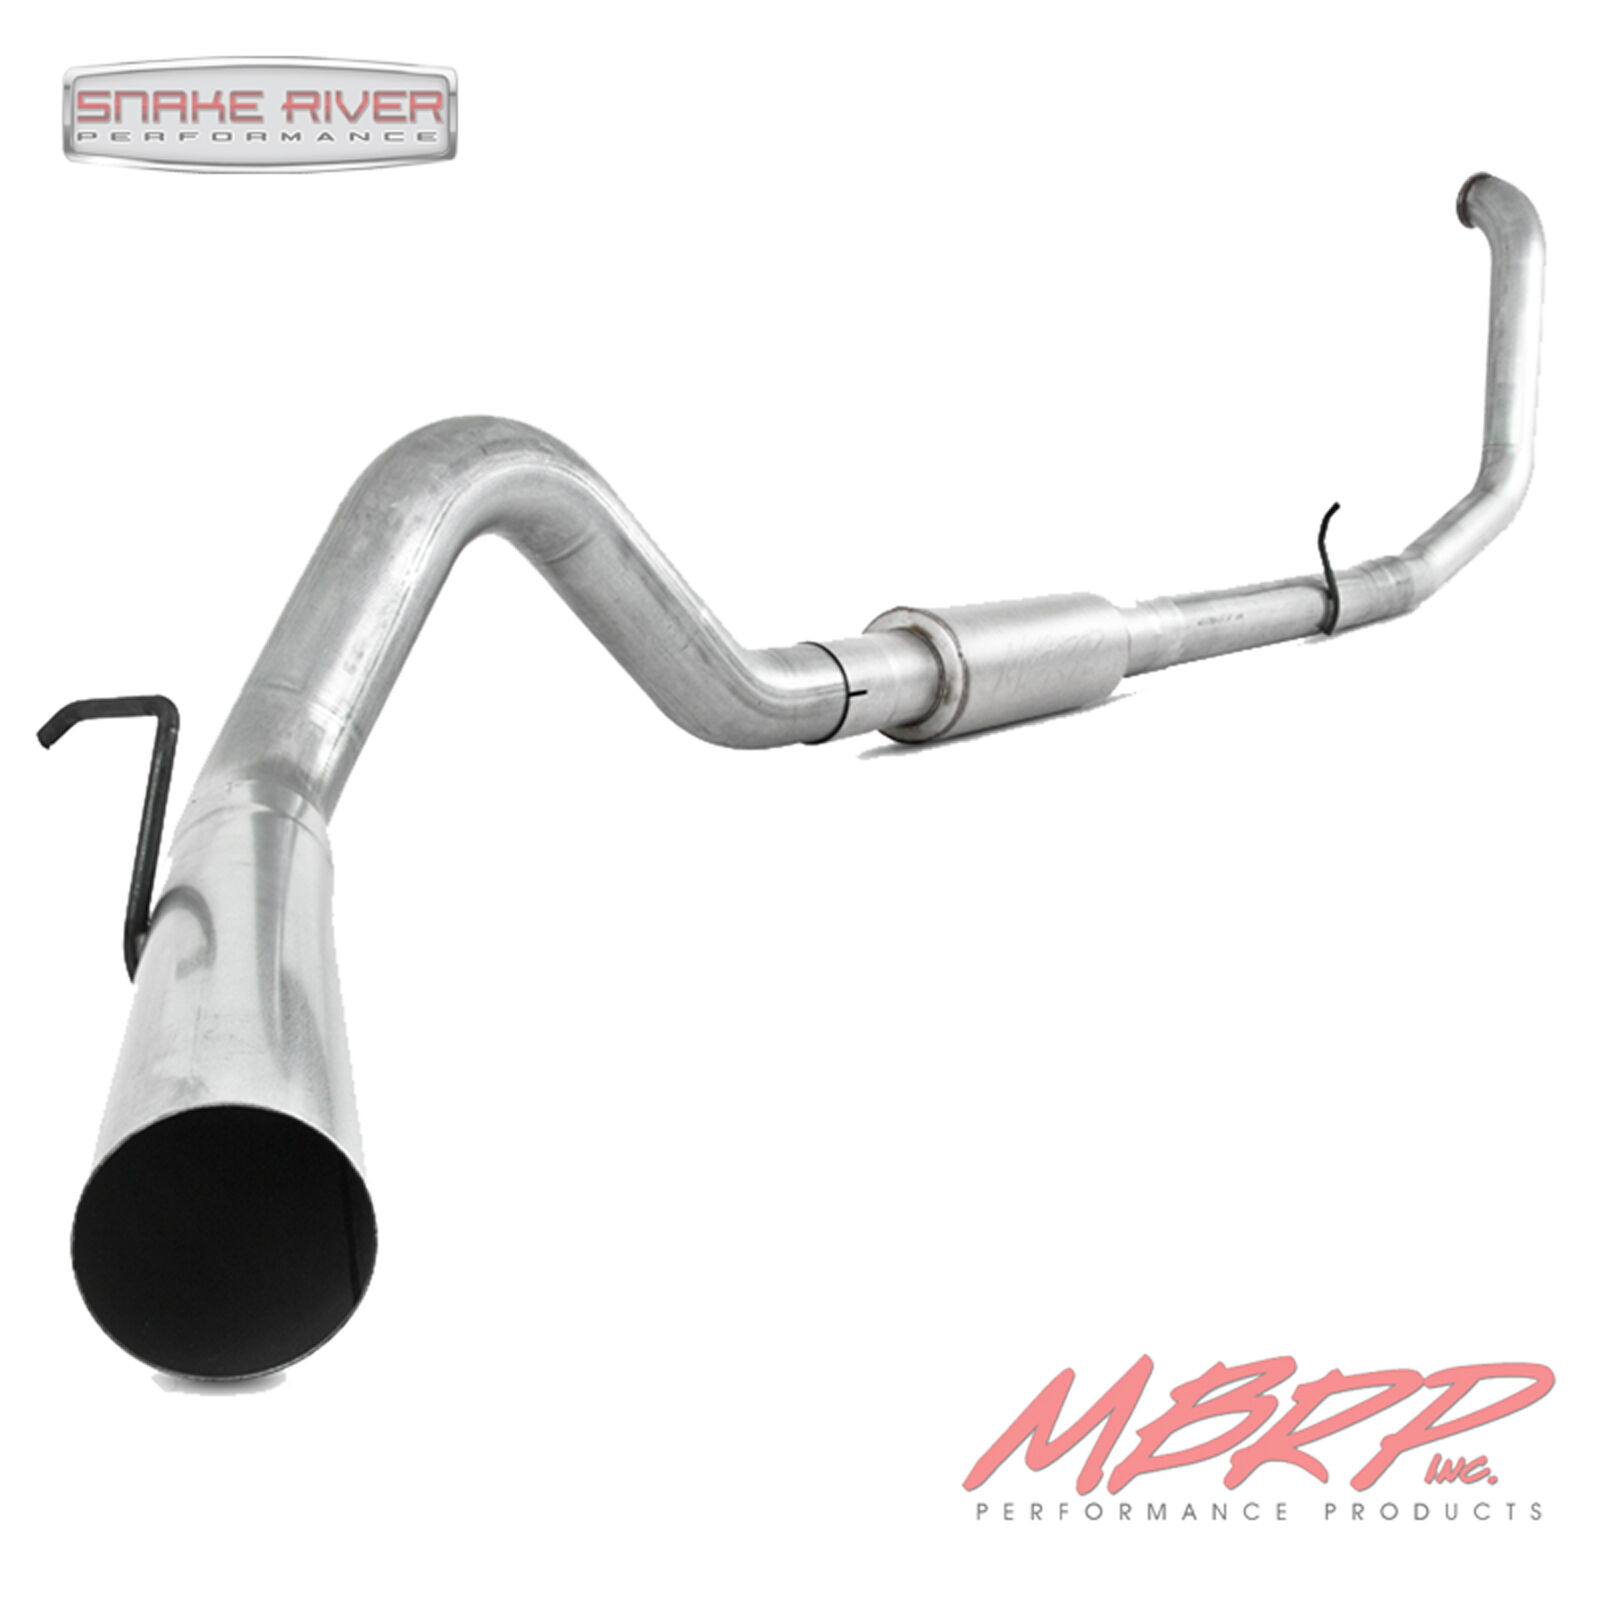 MBRP 5" EXHAUST FOR 1999-2003 FORD F250 F350 POWERSTROKE DIESEL 7.3L